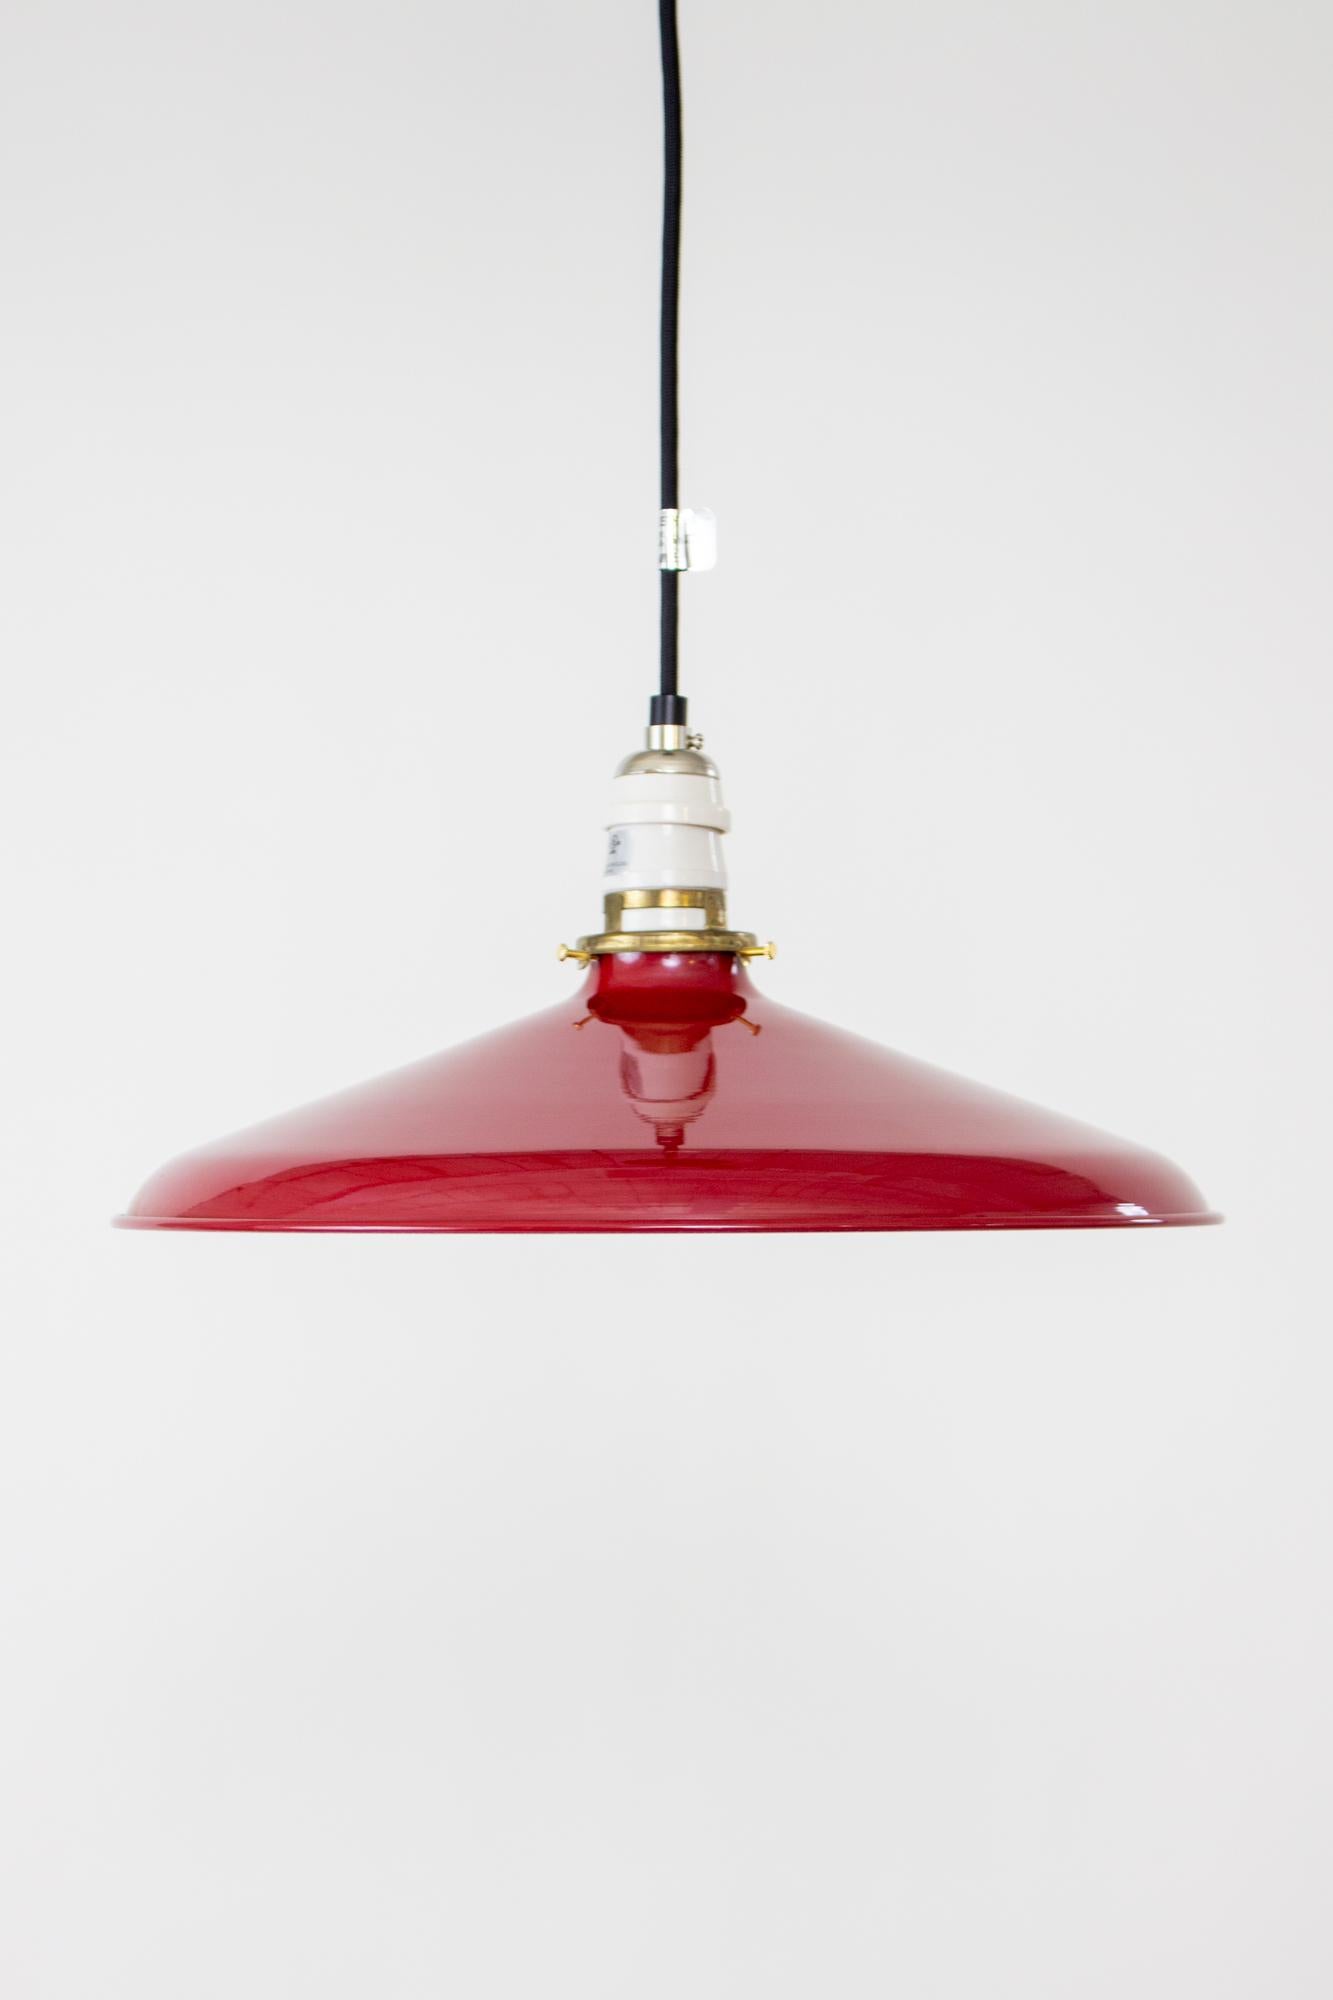 Red enamel industrial pendant. Black cord and canopy, porcelain antique style socket, antique clamp fitter and milk glass disk shade. Shown with Edison style bulb as a style suggestion, bulb is not included. Fixture is adjustable from 11